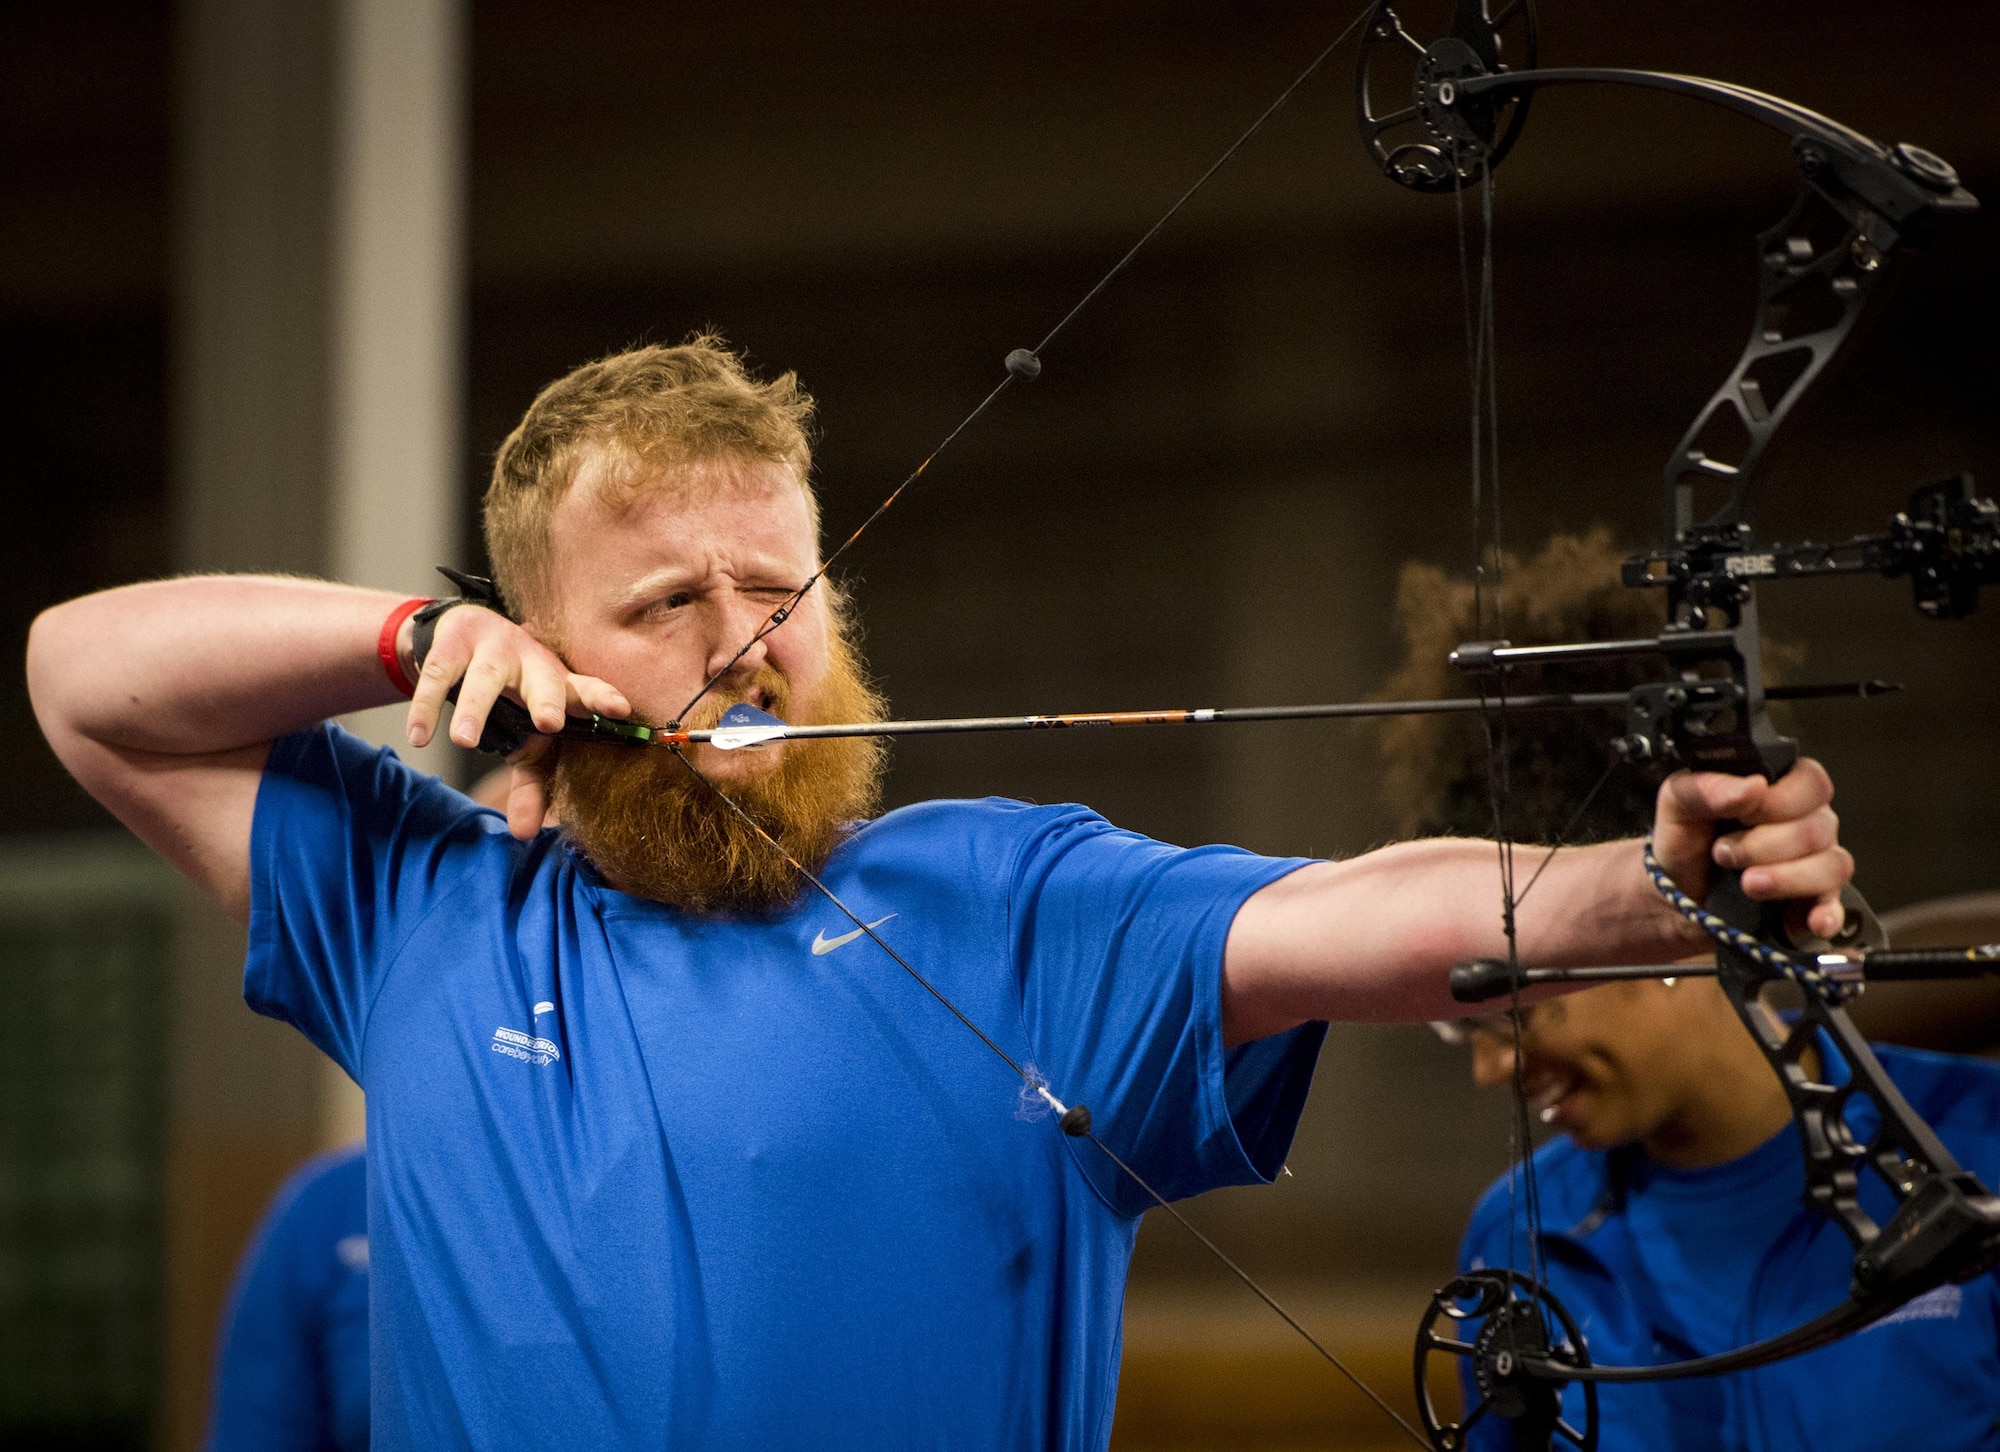 Robert Wiles, a Warrior CARE athlete, aims for a bullseye during an archery session at the adaptive sports camp at Eglin Air Force Base, Fla., April 24. The base hosts the week-long Wound Warrior CARE event that helps recovering wounded, ill and injured military members through specific hand-on rehabilitative training. (U.S. Air Force photo/Samuel King Jr.)